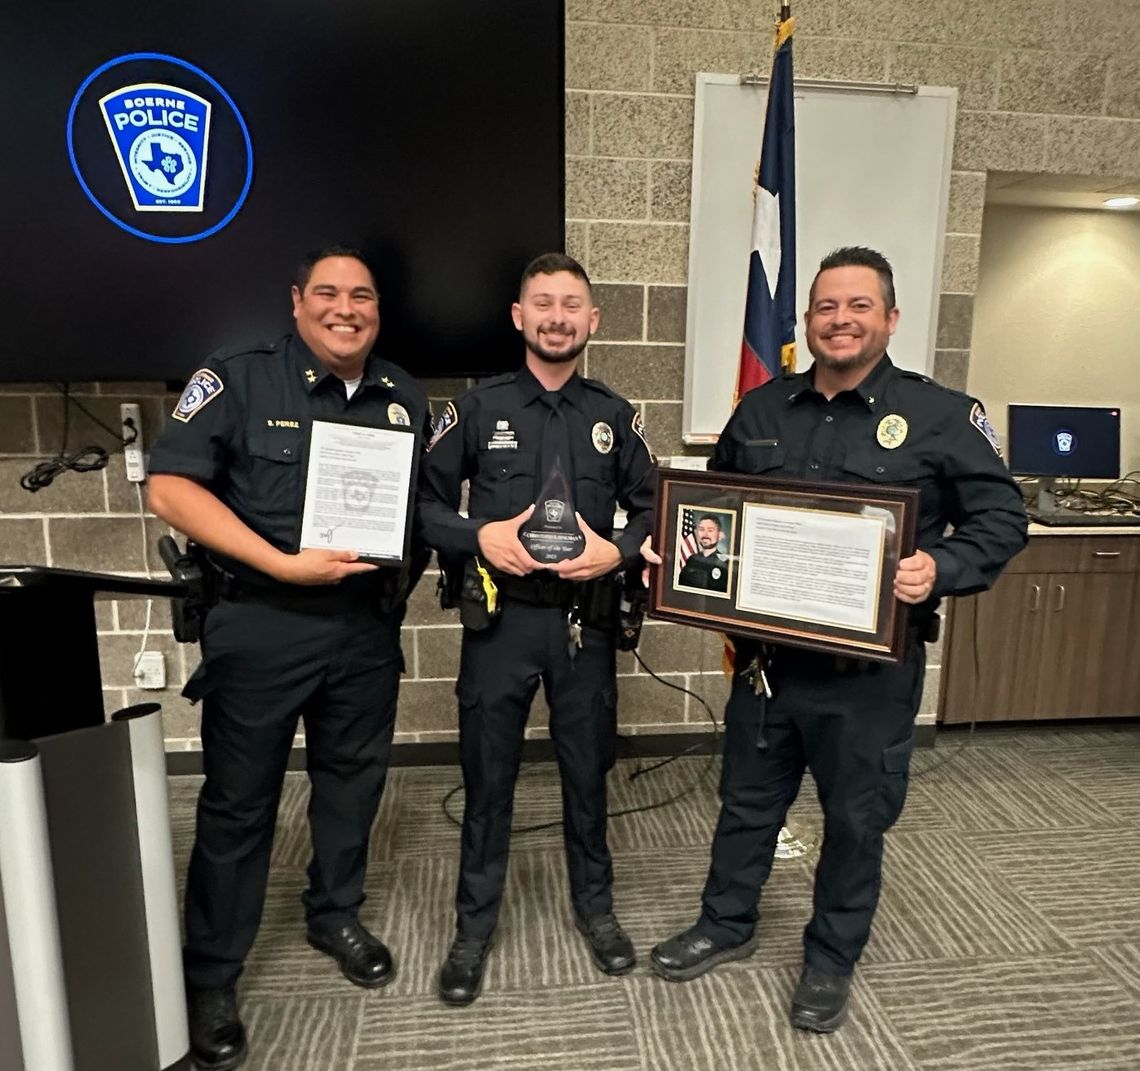 Dingman named Boerne PD ‘Officer of the Year’